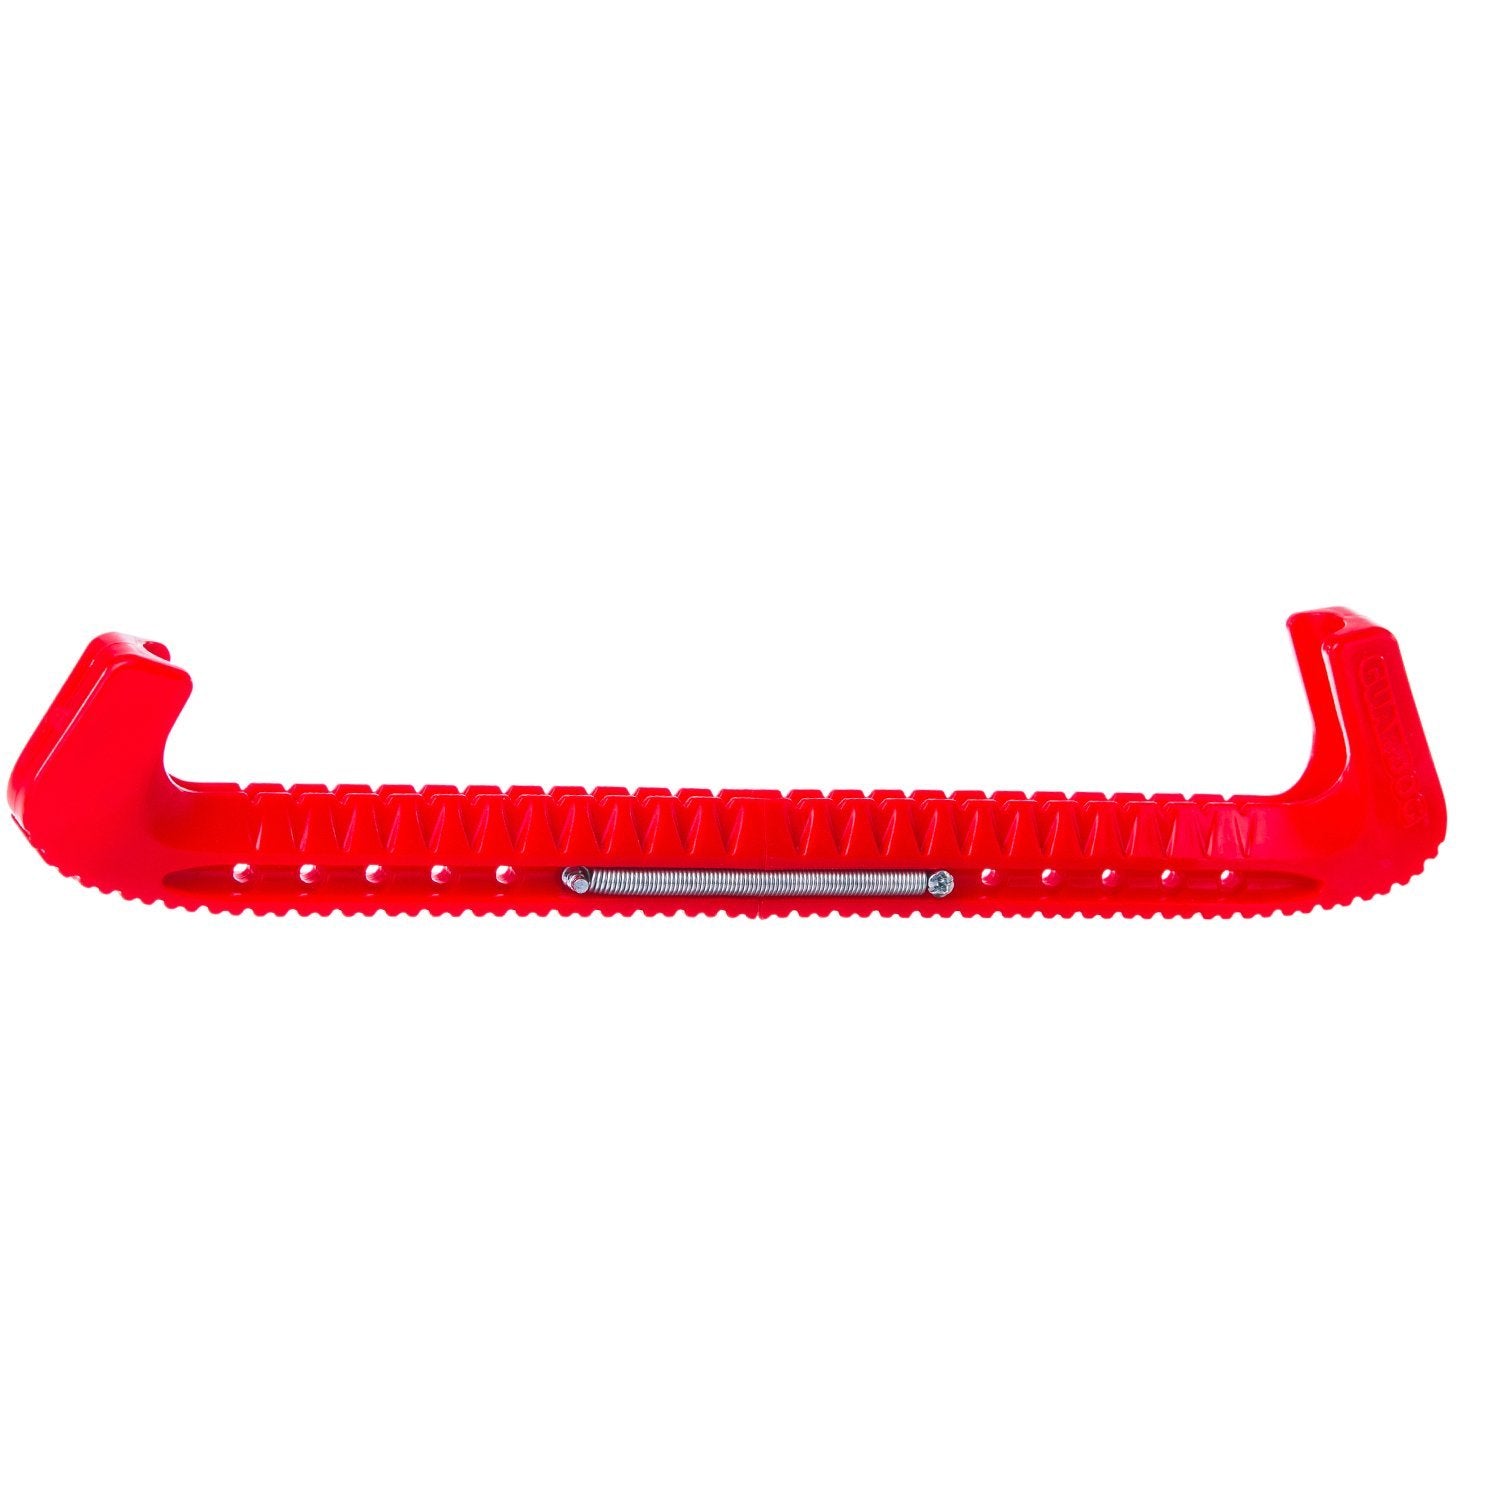 Guardog expandable skate guards in red